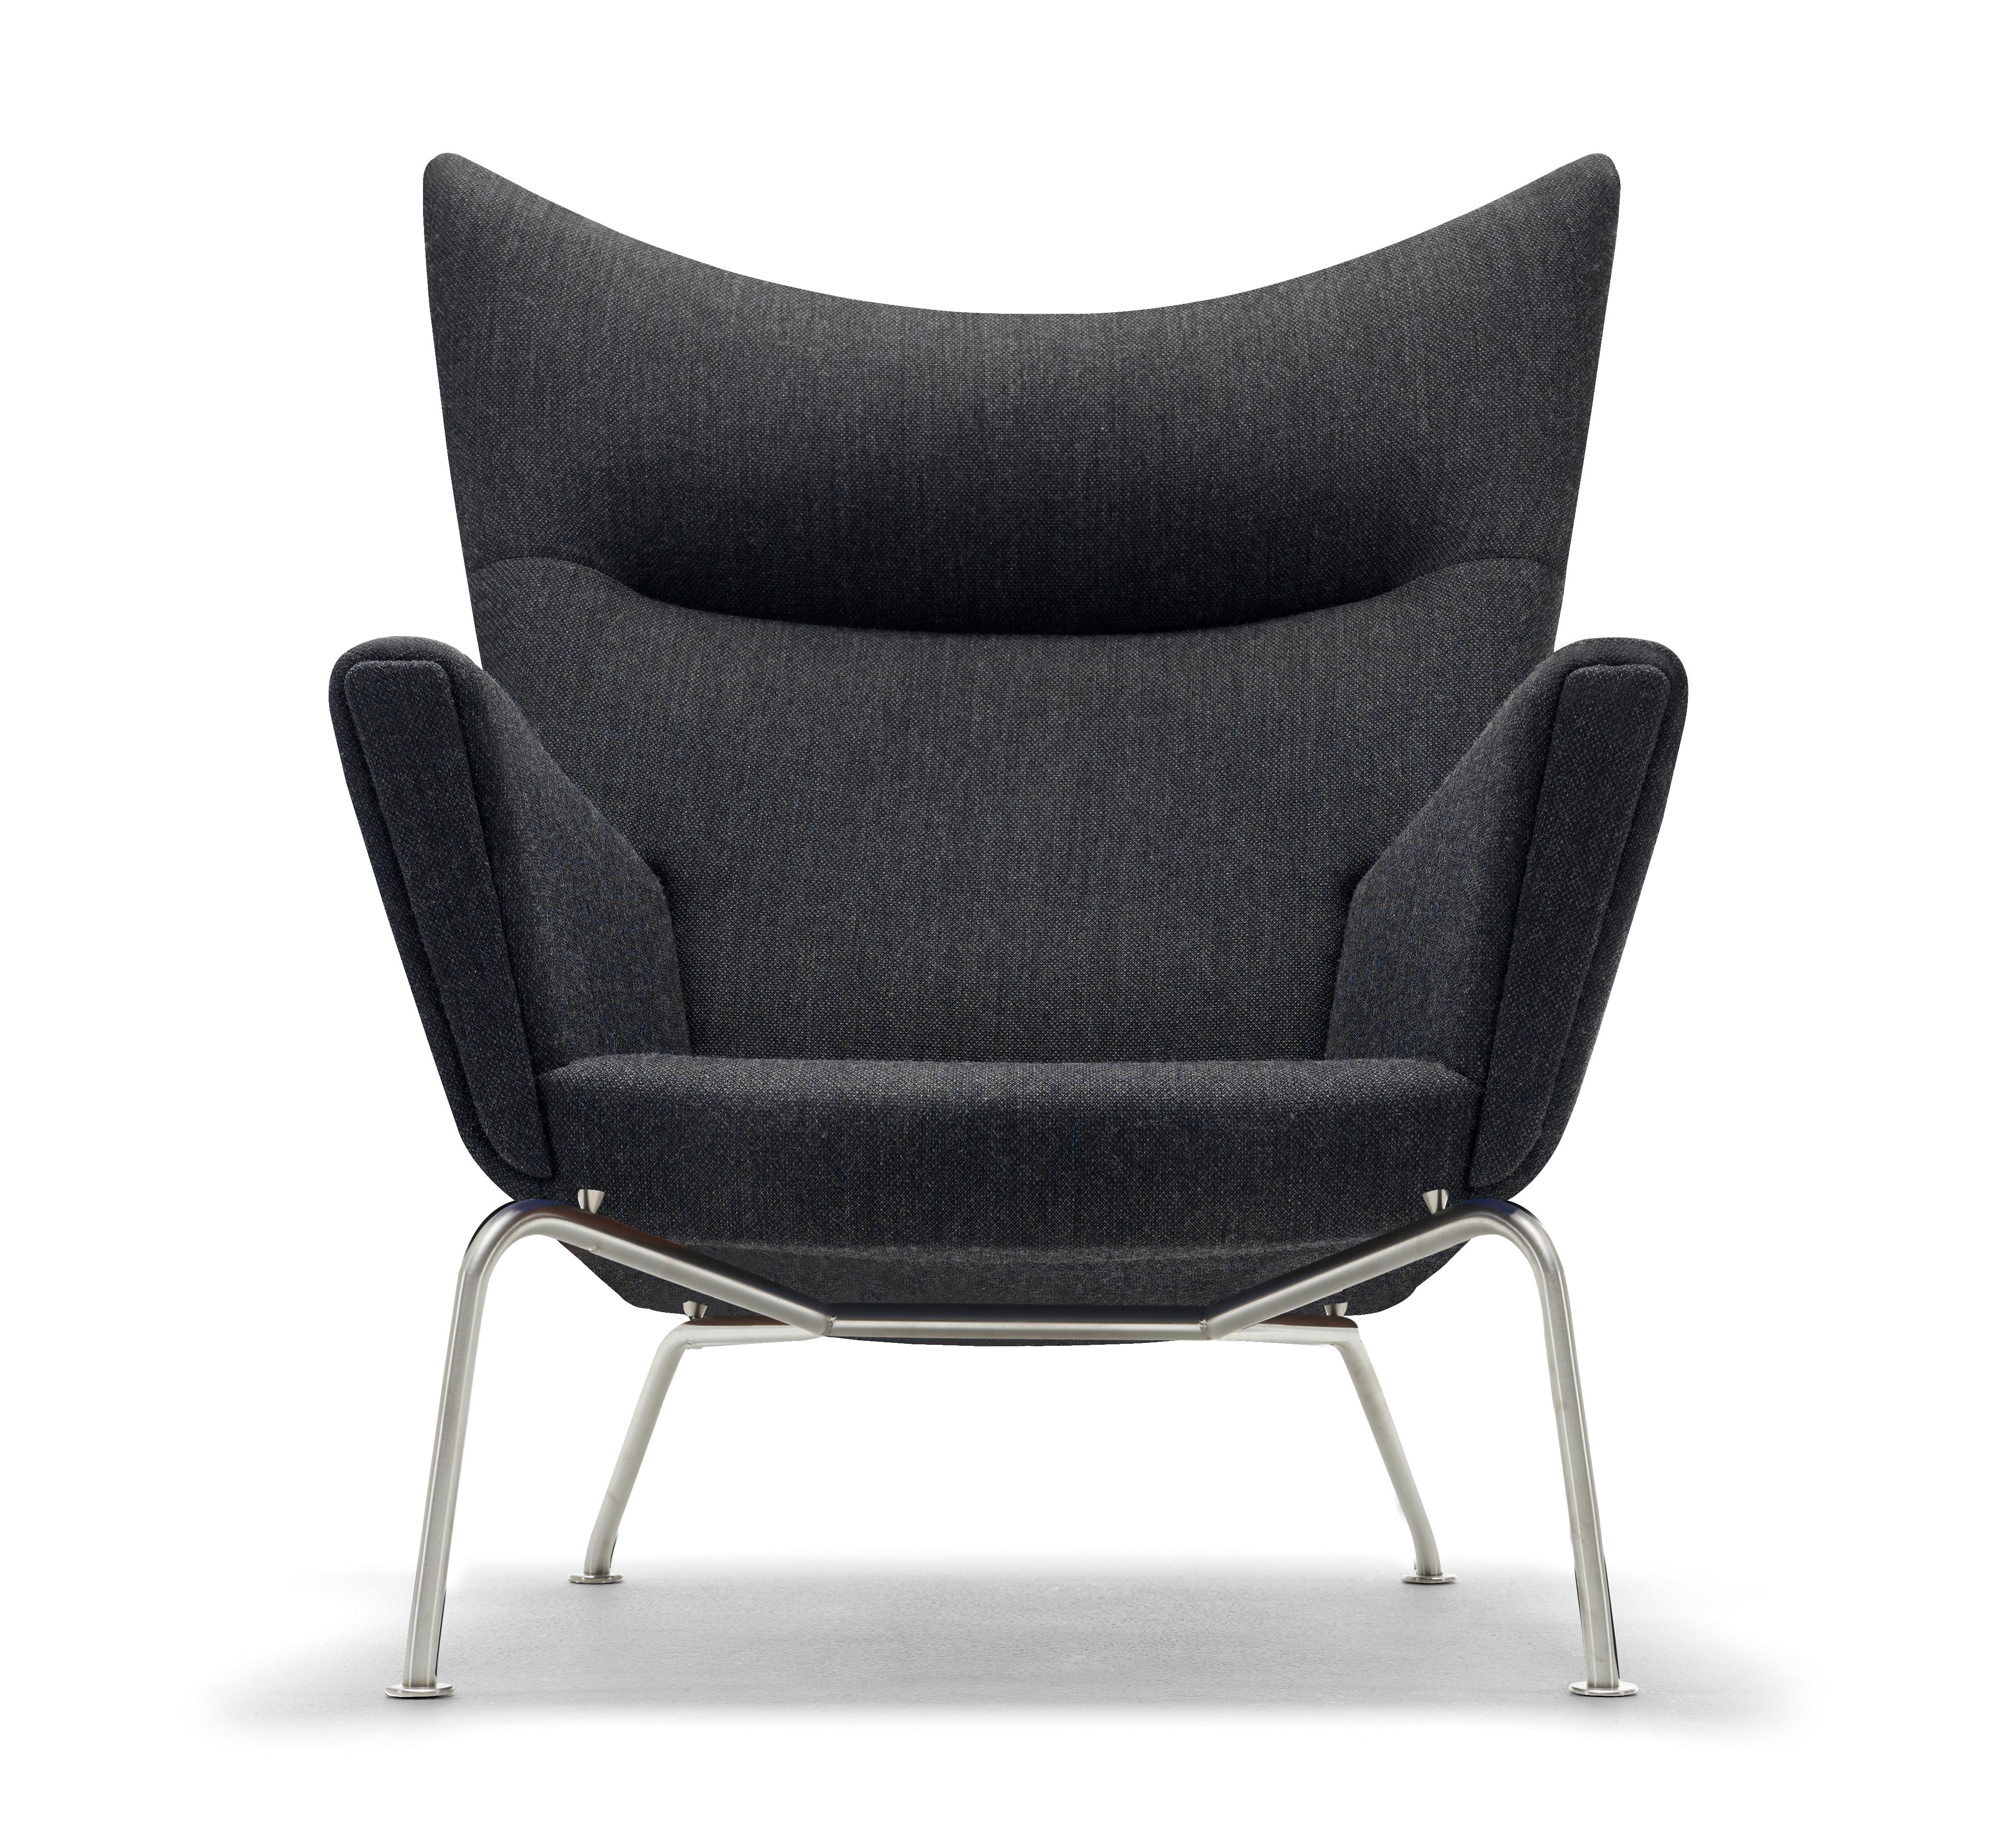 Black (Kvadrat Fiord 191) CH445 Wing Chair in Fabric with Stainless Steel Base by Hans J. Wegner